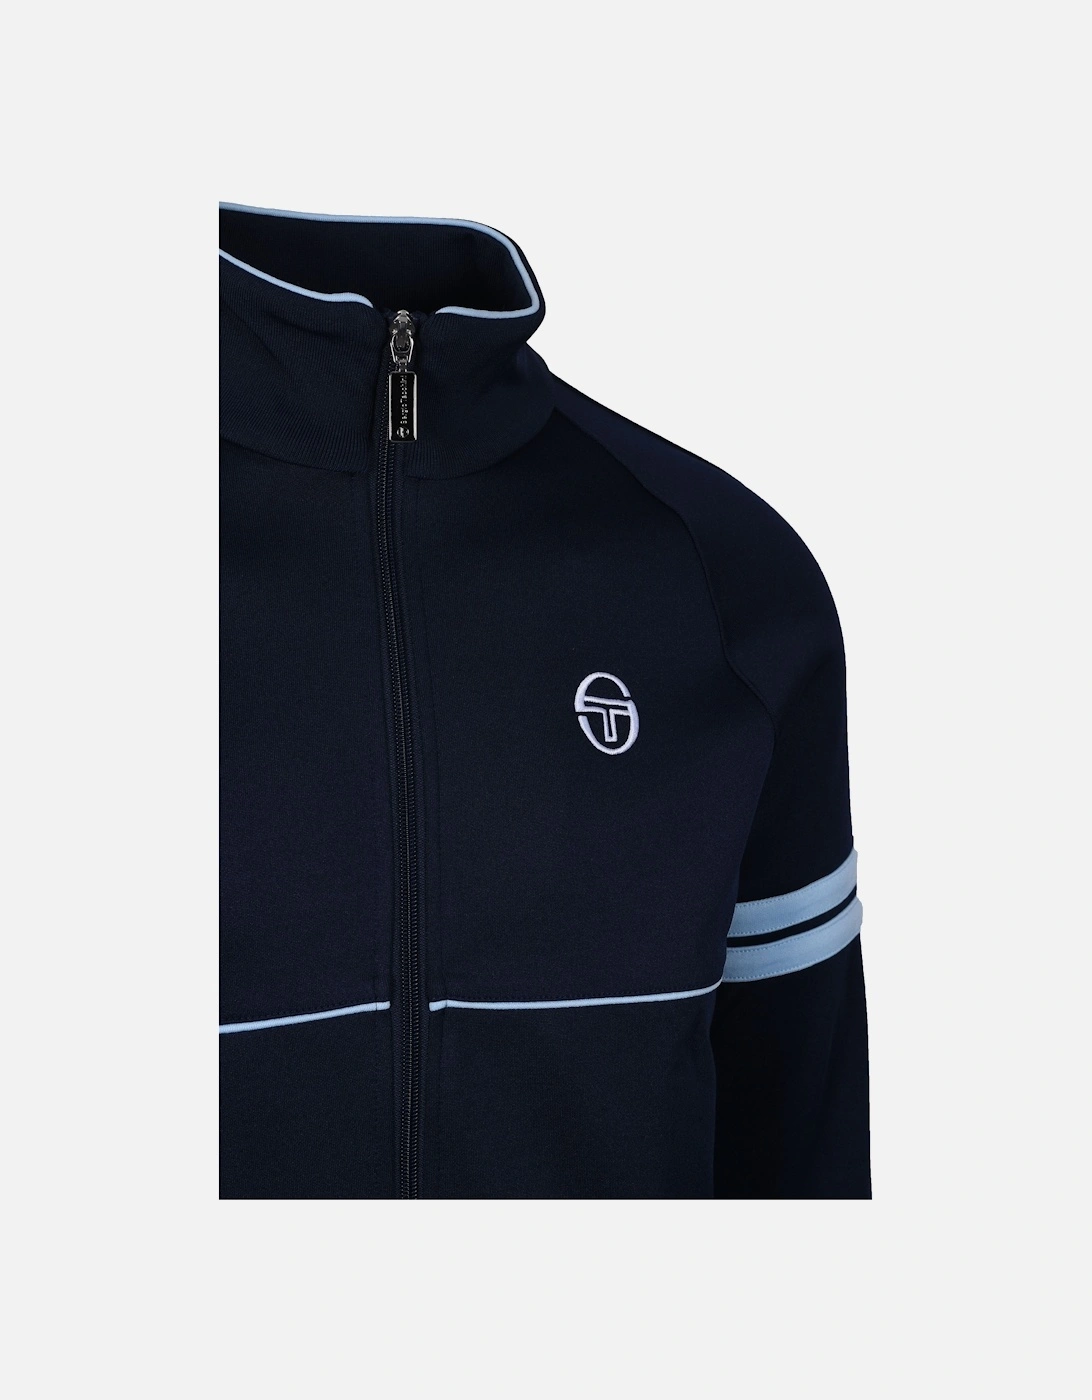 Orion Track Top Maritime Blue/Clear Sky